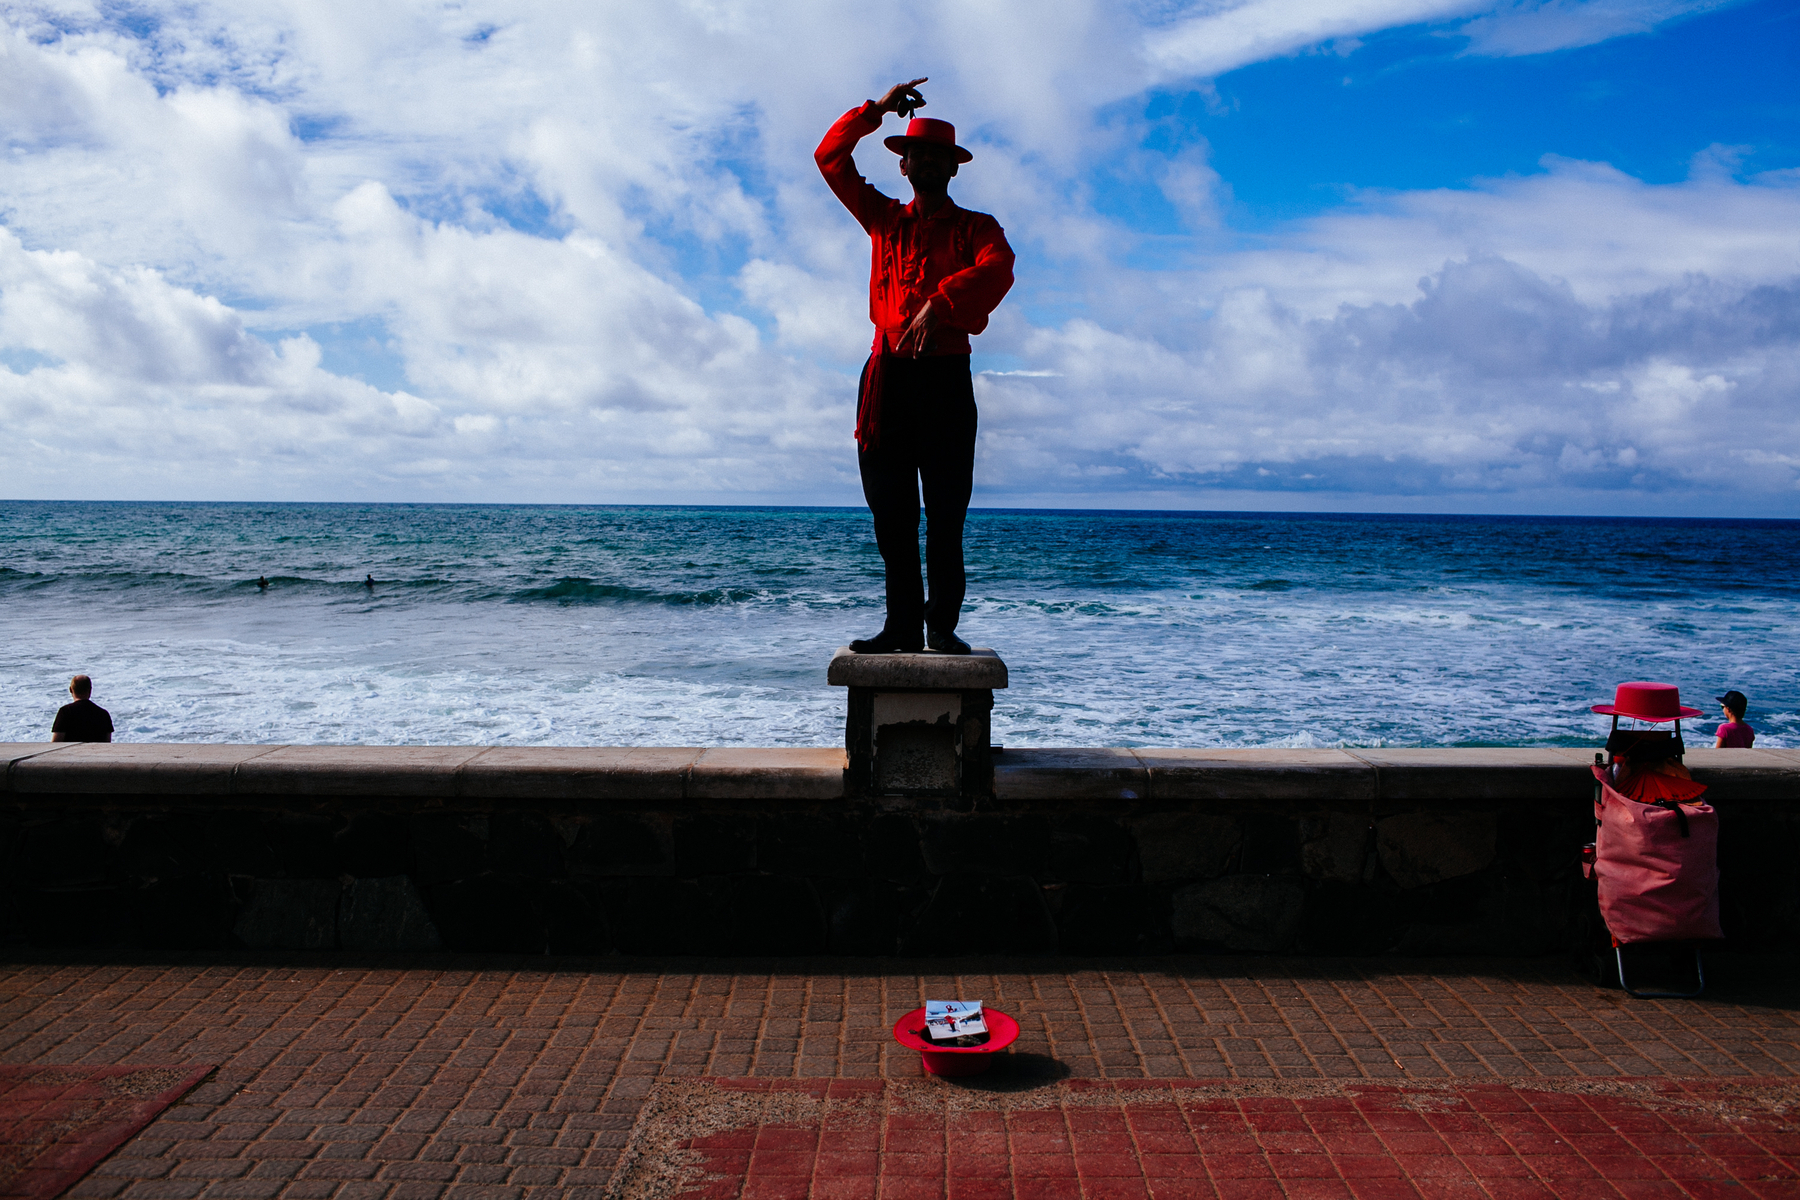 A “human statue” performer stands still in front of the ocean. 